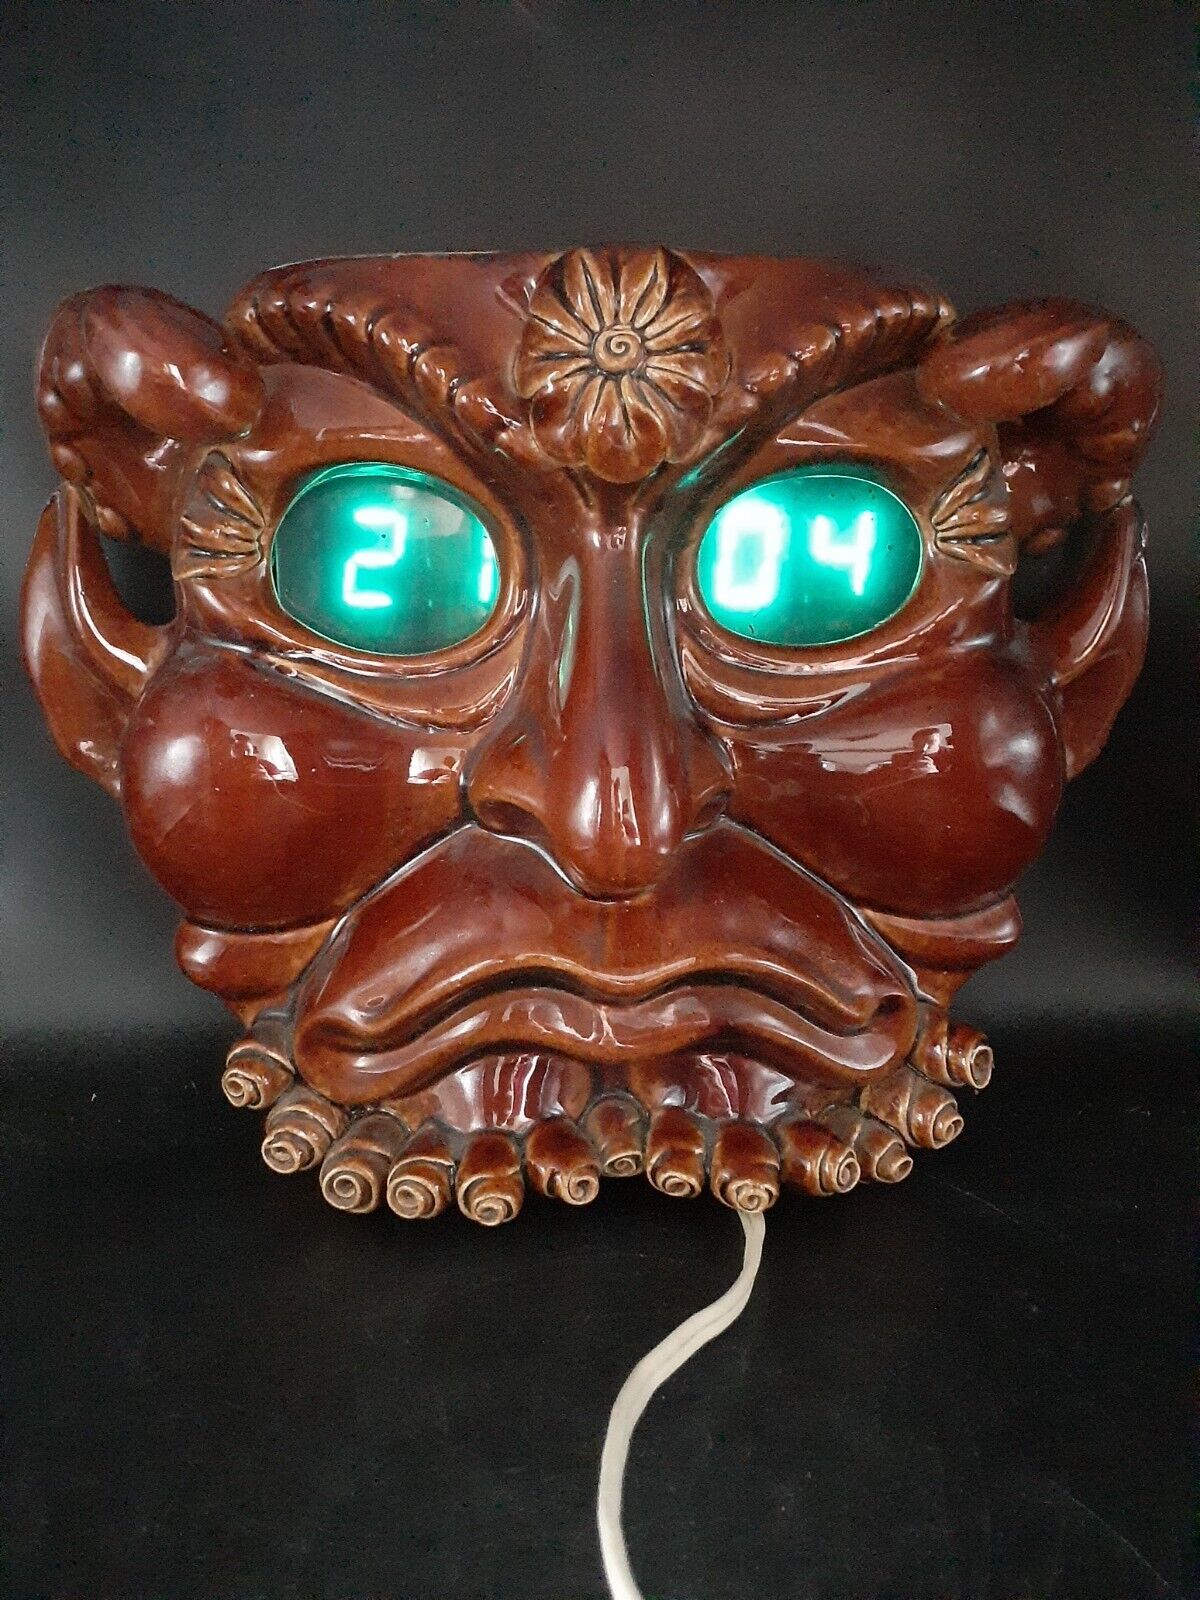 Vintage Soviet electronic wall clock in the form of a demon.